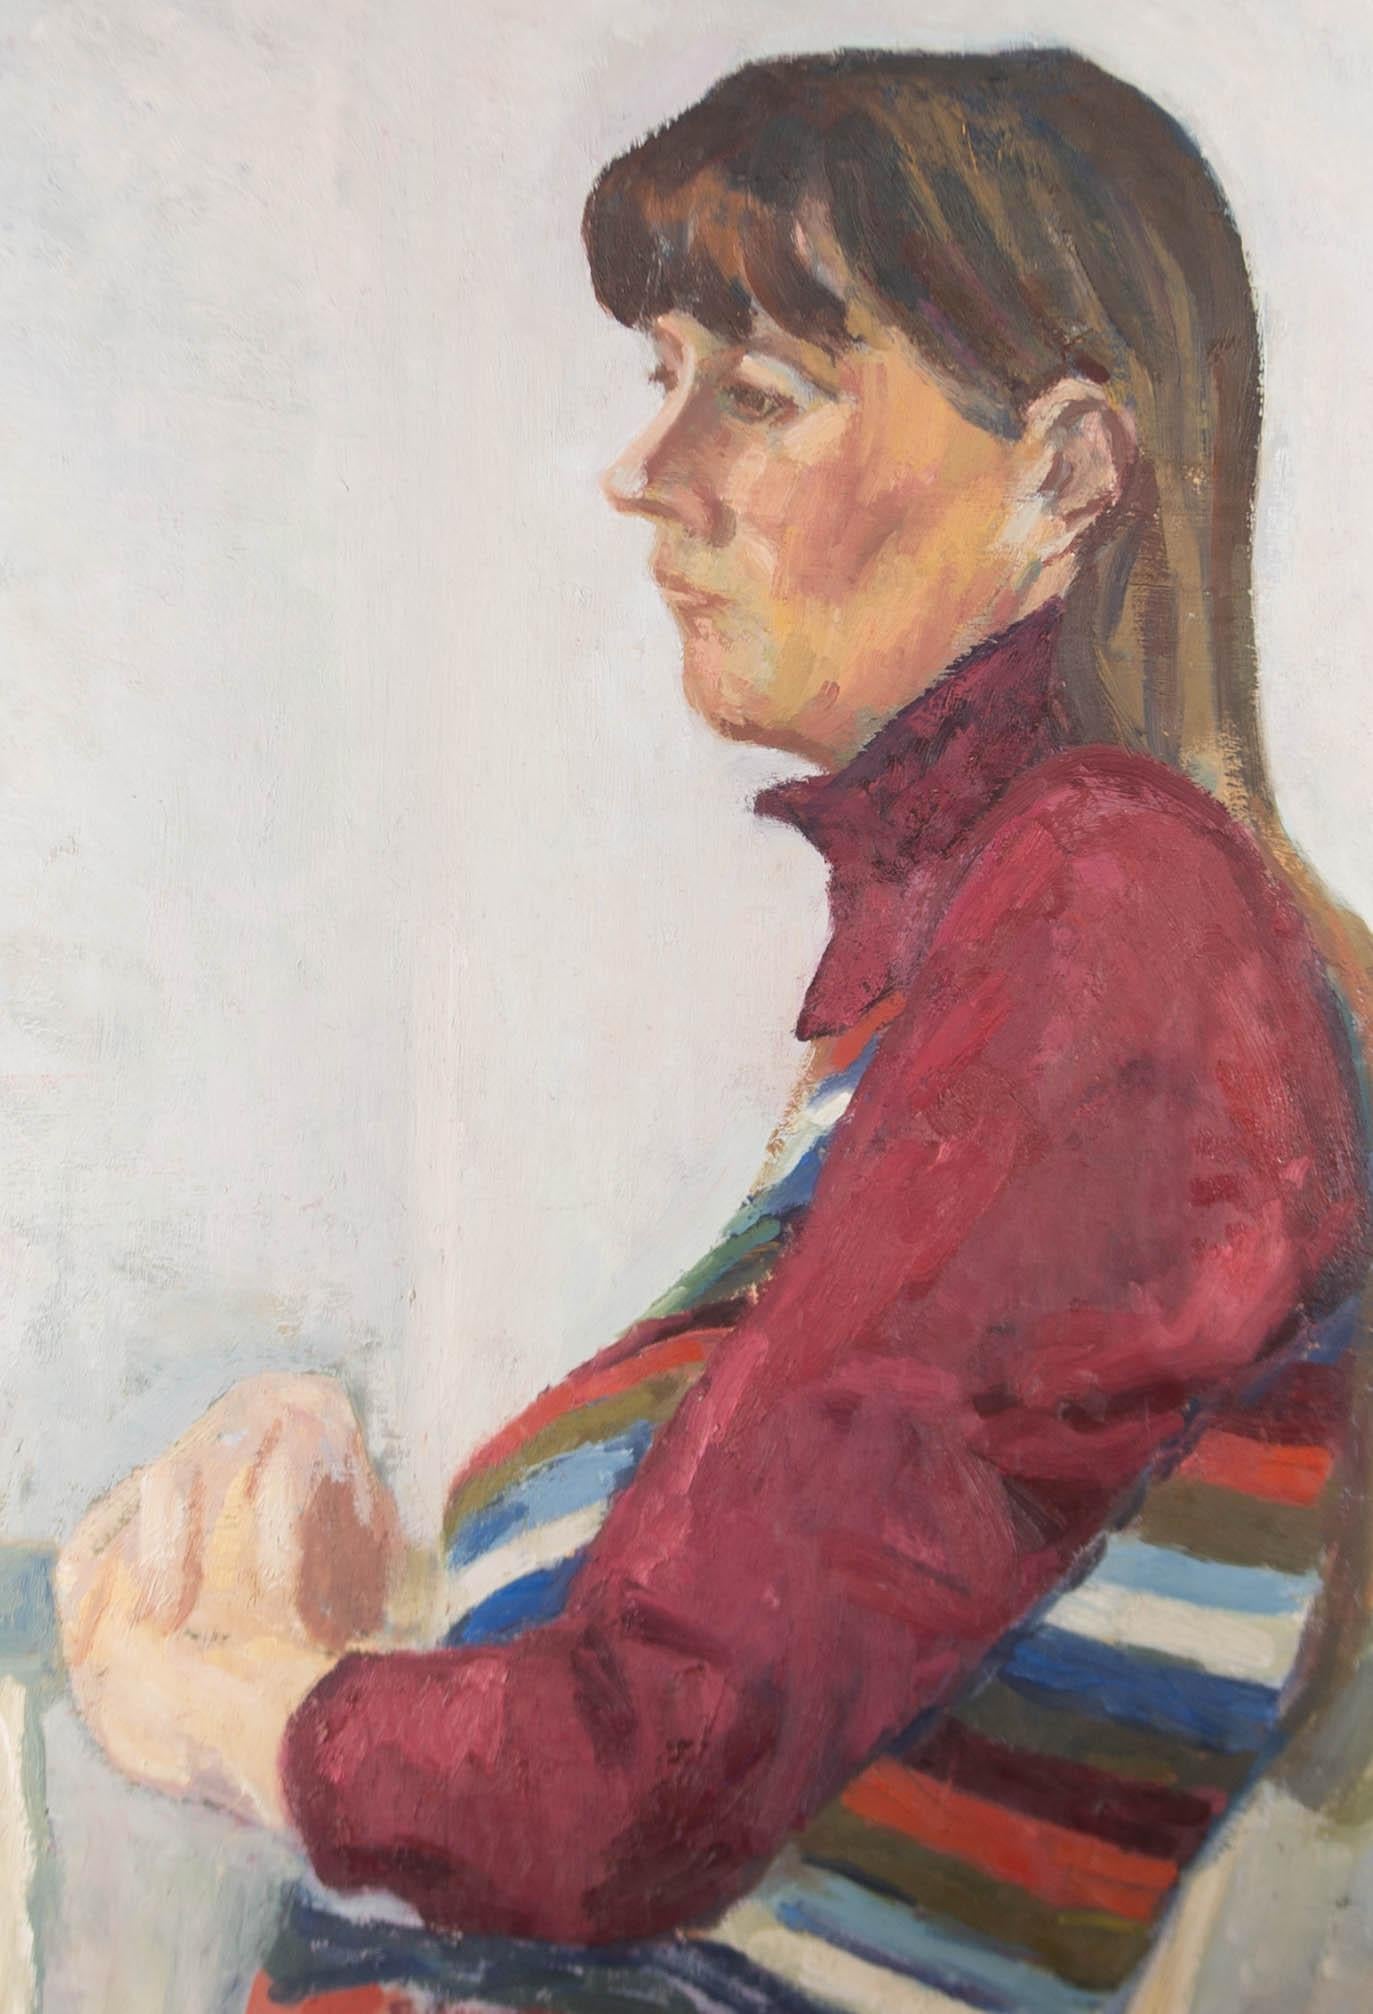 Impastoed oils provide gestural subtleties to this muted portrait of a woman lost in contemplation. The overall artwork provides a subdued, quiet atmosphere. Unsigned.

On wove.